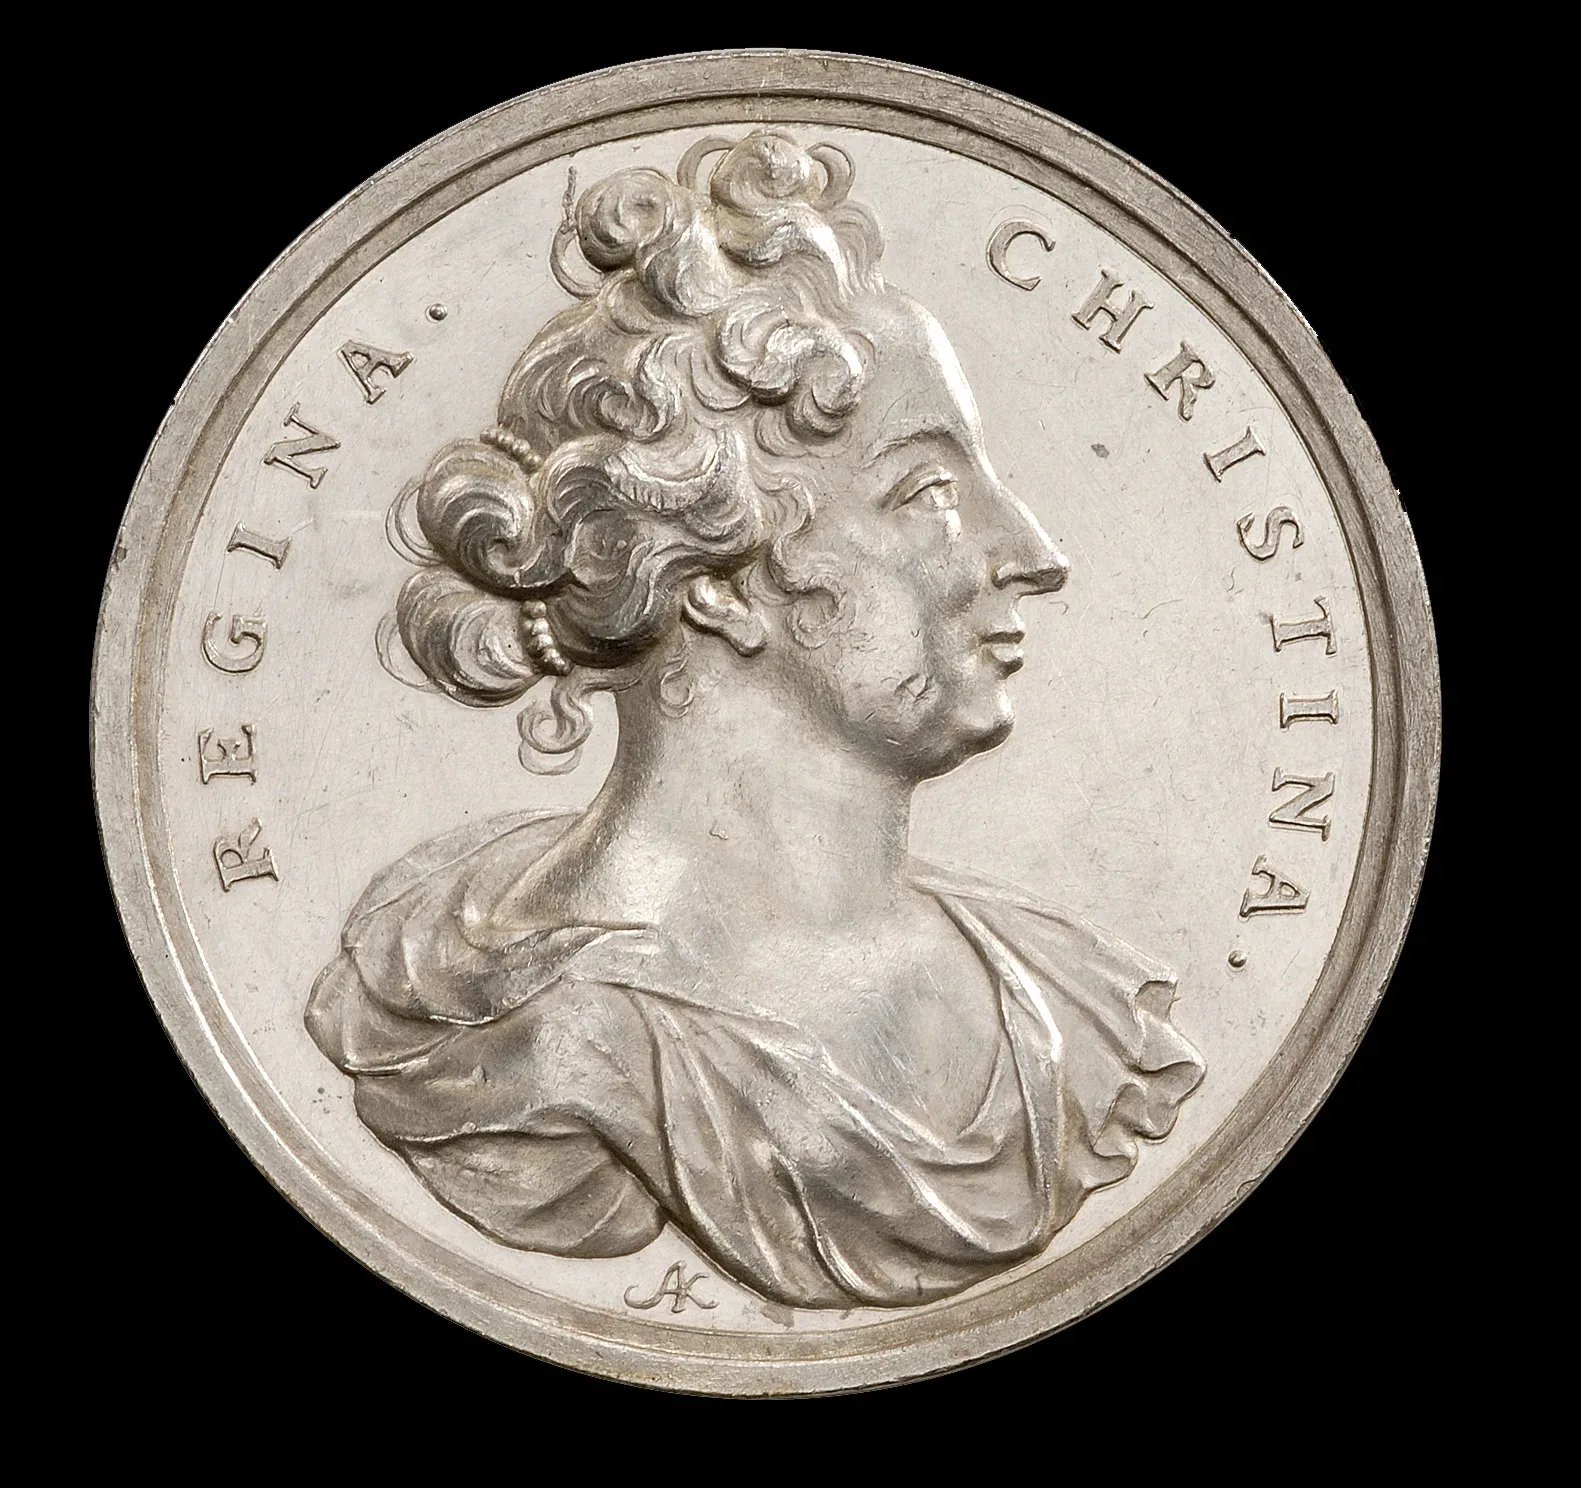 A coin with a portrait of Christina, Queen of Sweden.